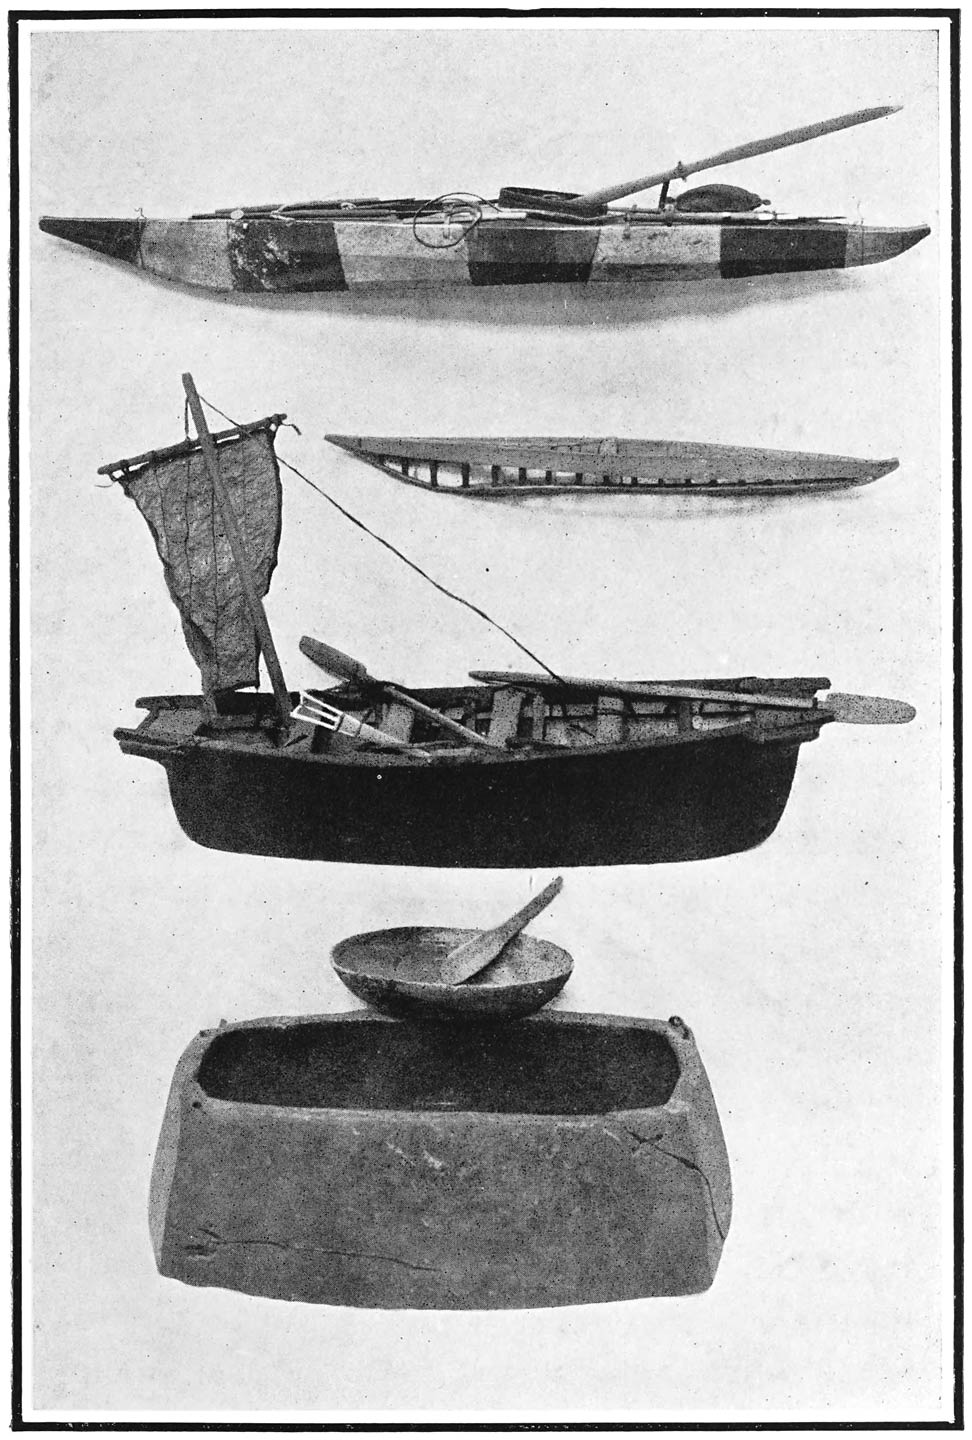 (1) A Kayak. Fully equipped for hunting. (2) The Light Framework of (1) over which skin is stitched. (3) Model of a Umiak. The sail is made of seal intestines. (4) An Okushuk. A cooking-pot with drinking-bowl, made of soapstone.